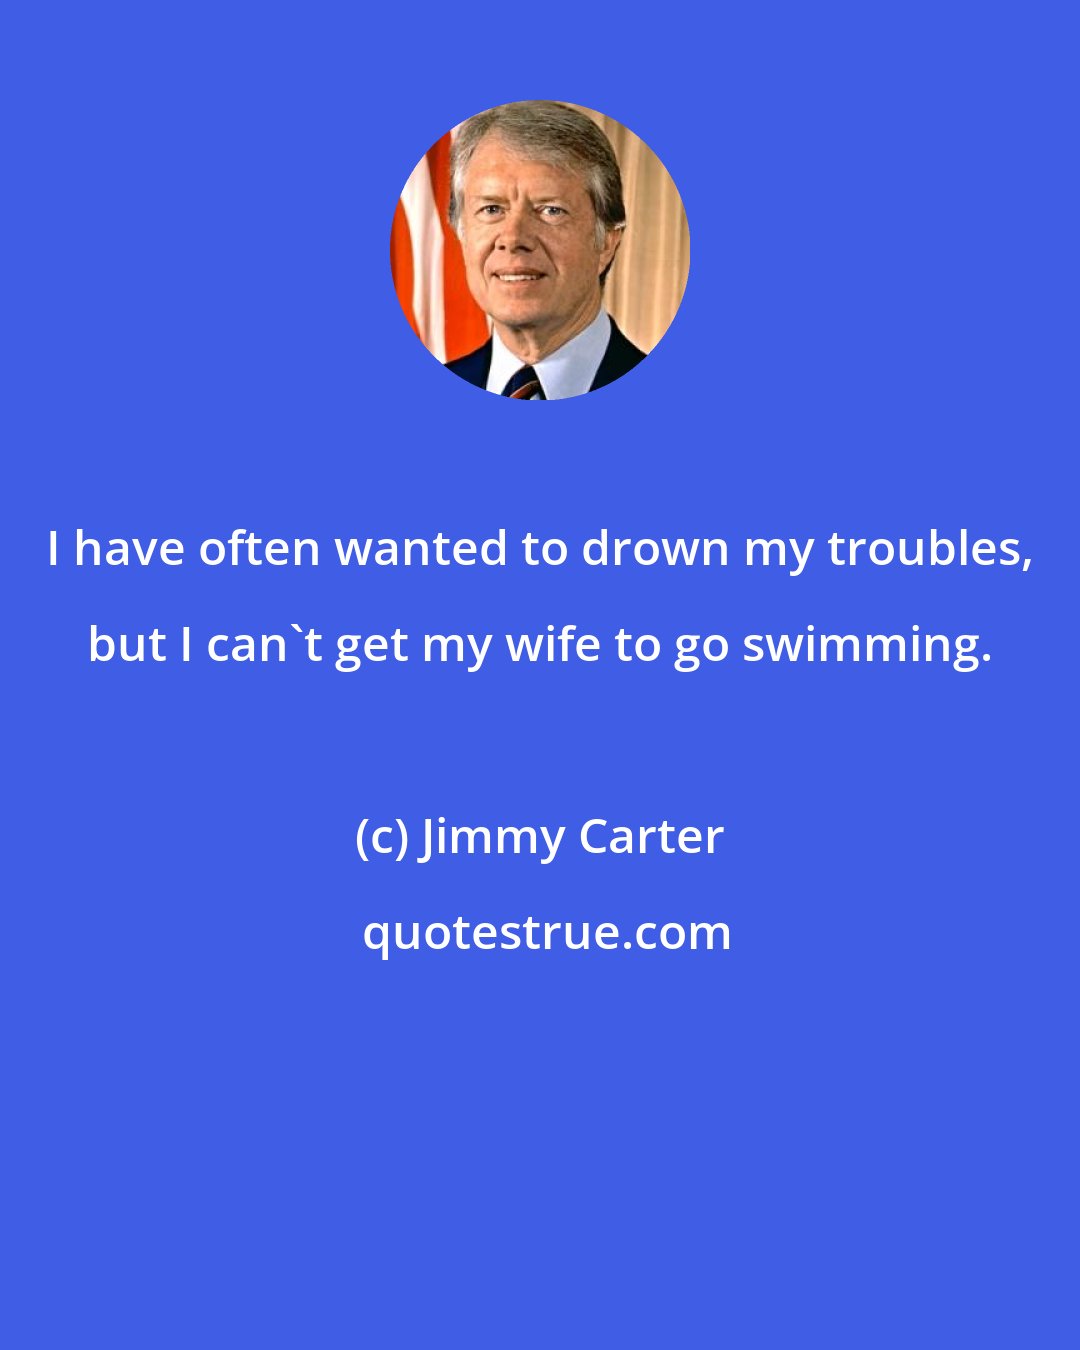 Jimmy Carter: I have often wanted to drown my troubles, but I can't get my wife to go swimming.